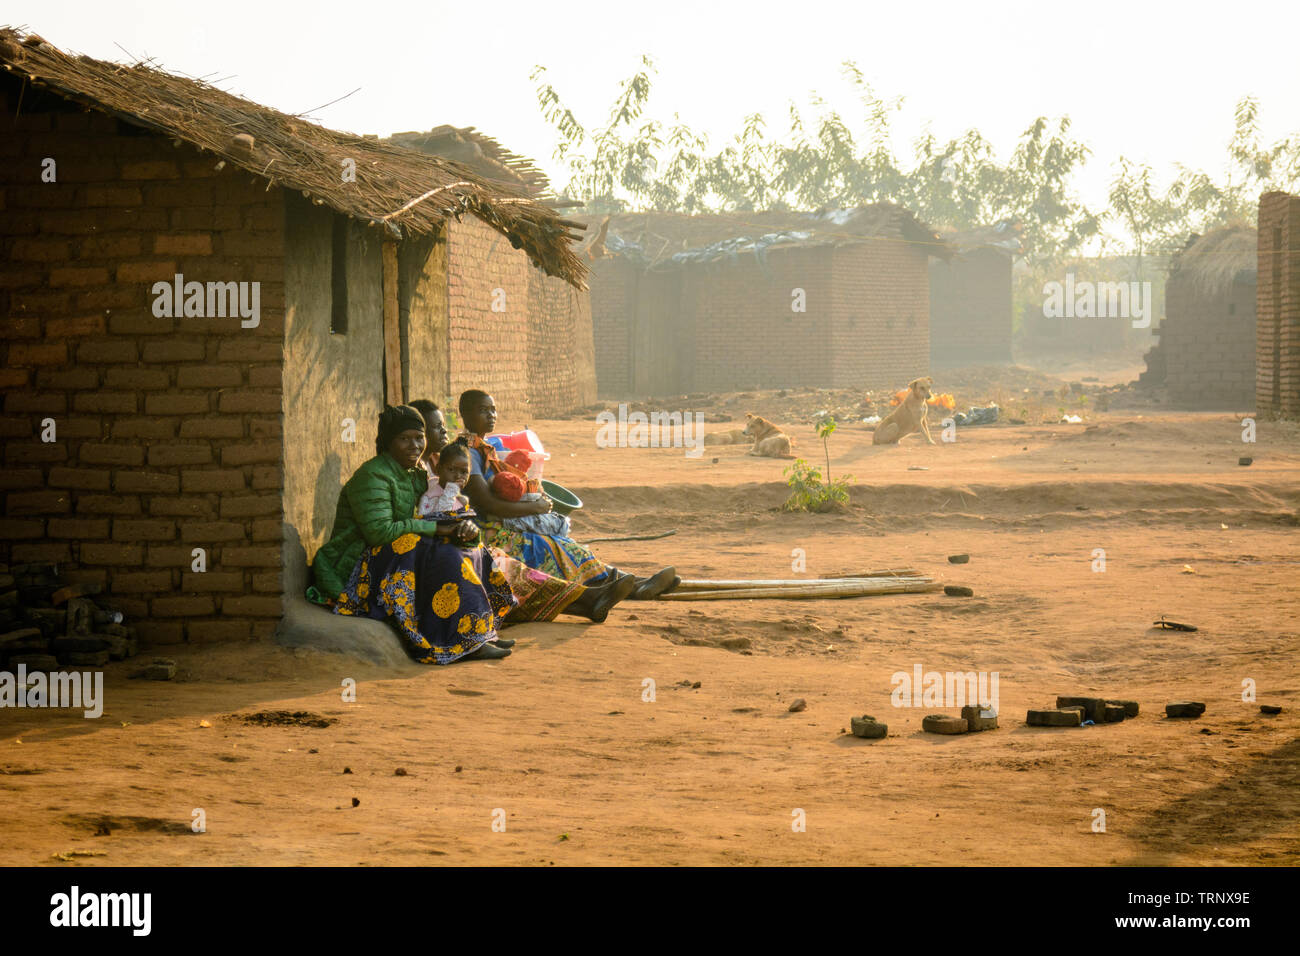 women holding babies gather on the step of their hut in a Malawian village as the sun sets Stock Photo